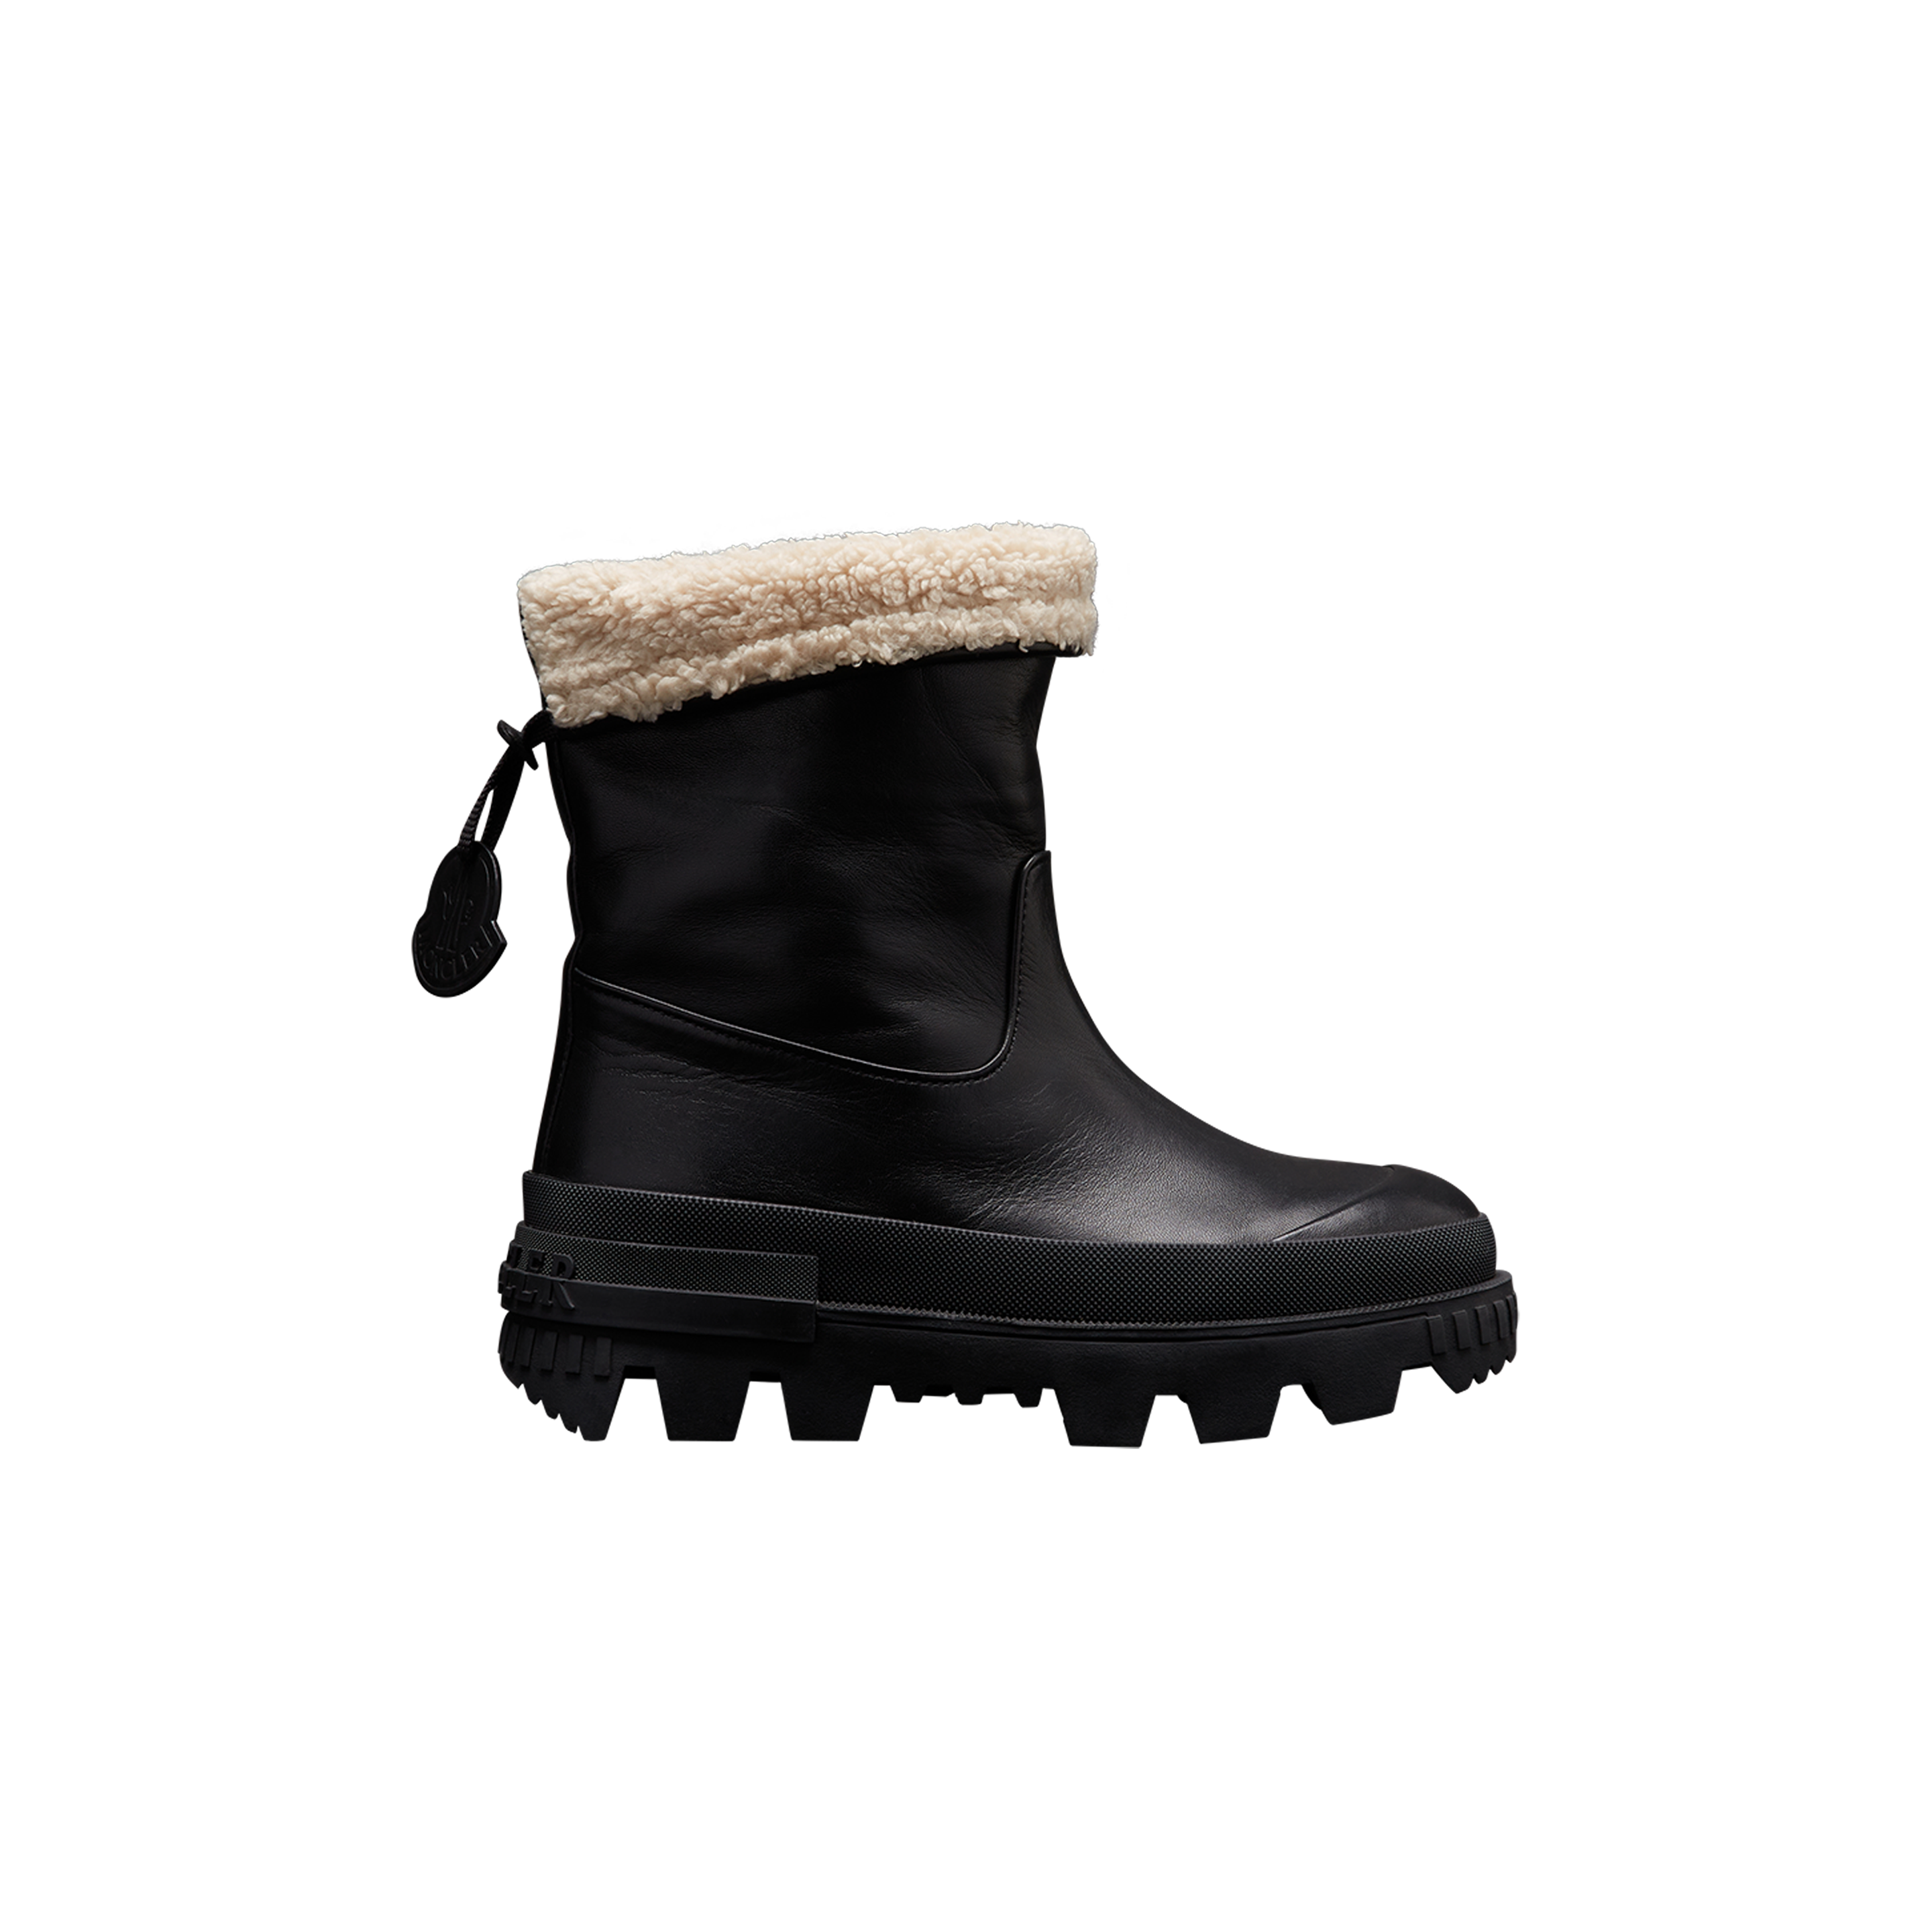 Moncler Collection Moscova Ankle Boots Black Size 38